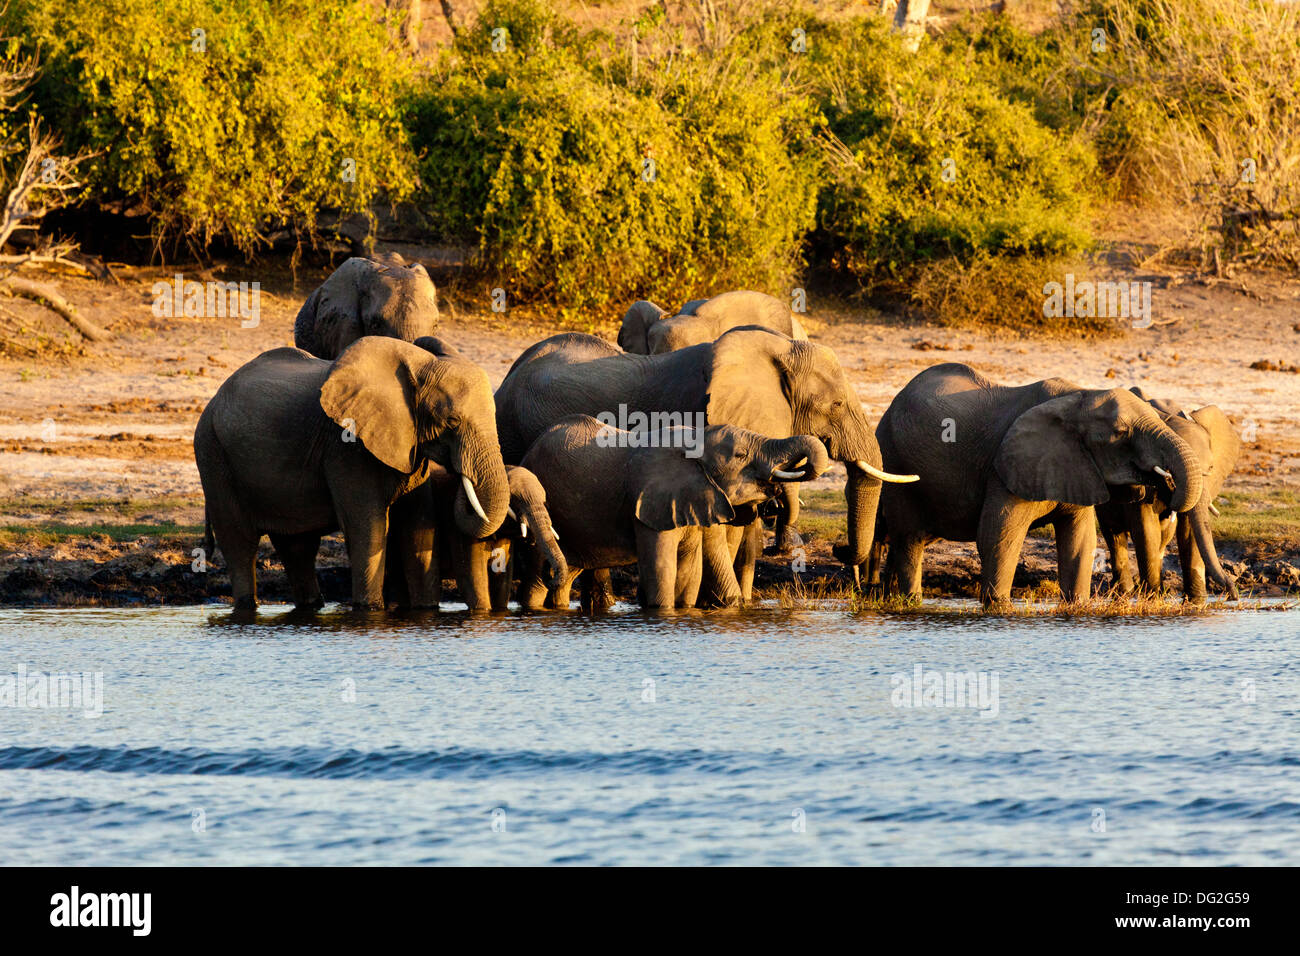 A breeding herd of African elephants (Loxodonta africana) drinking by the banks of the River Chobe in Botswana Stock Photo